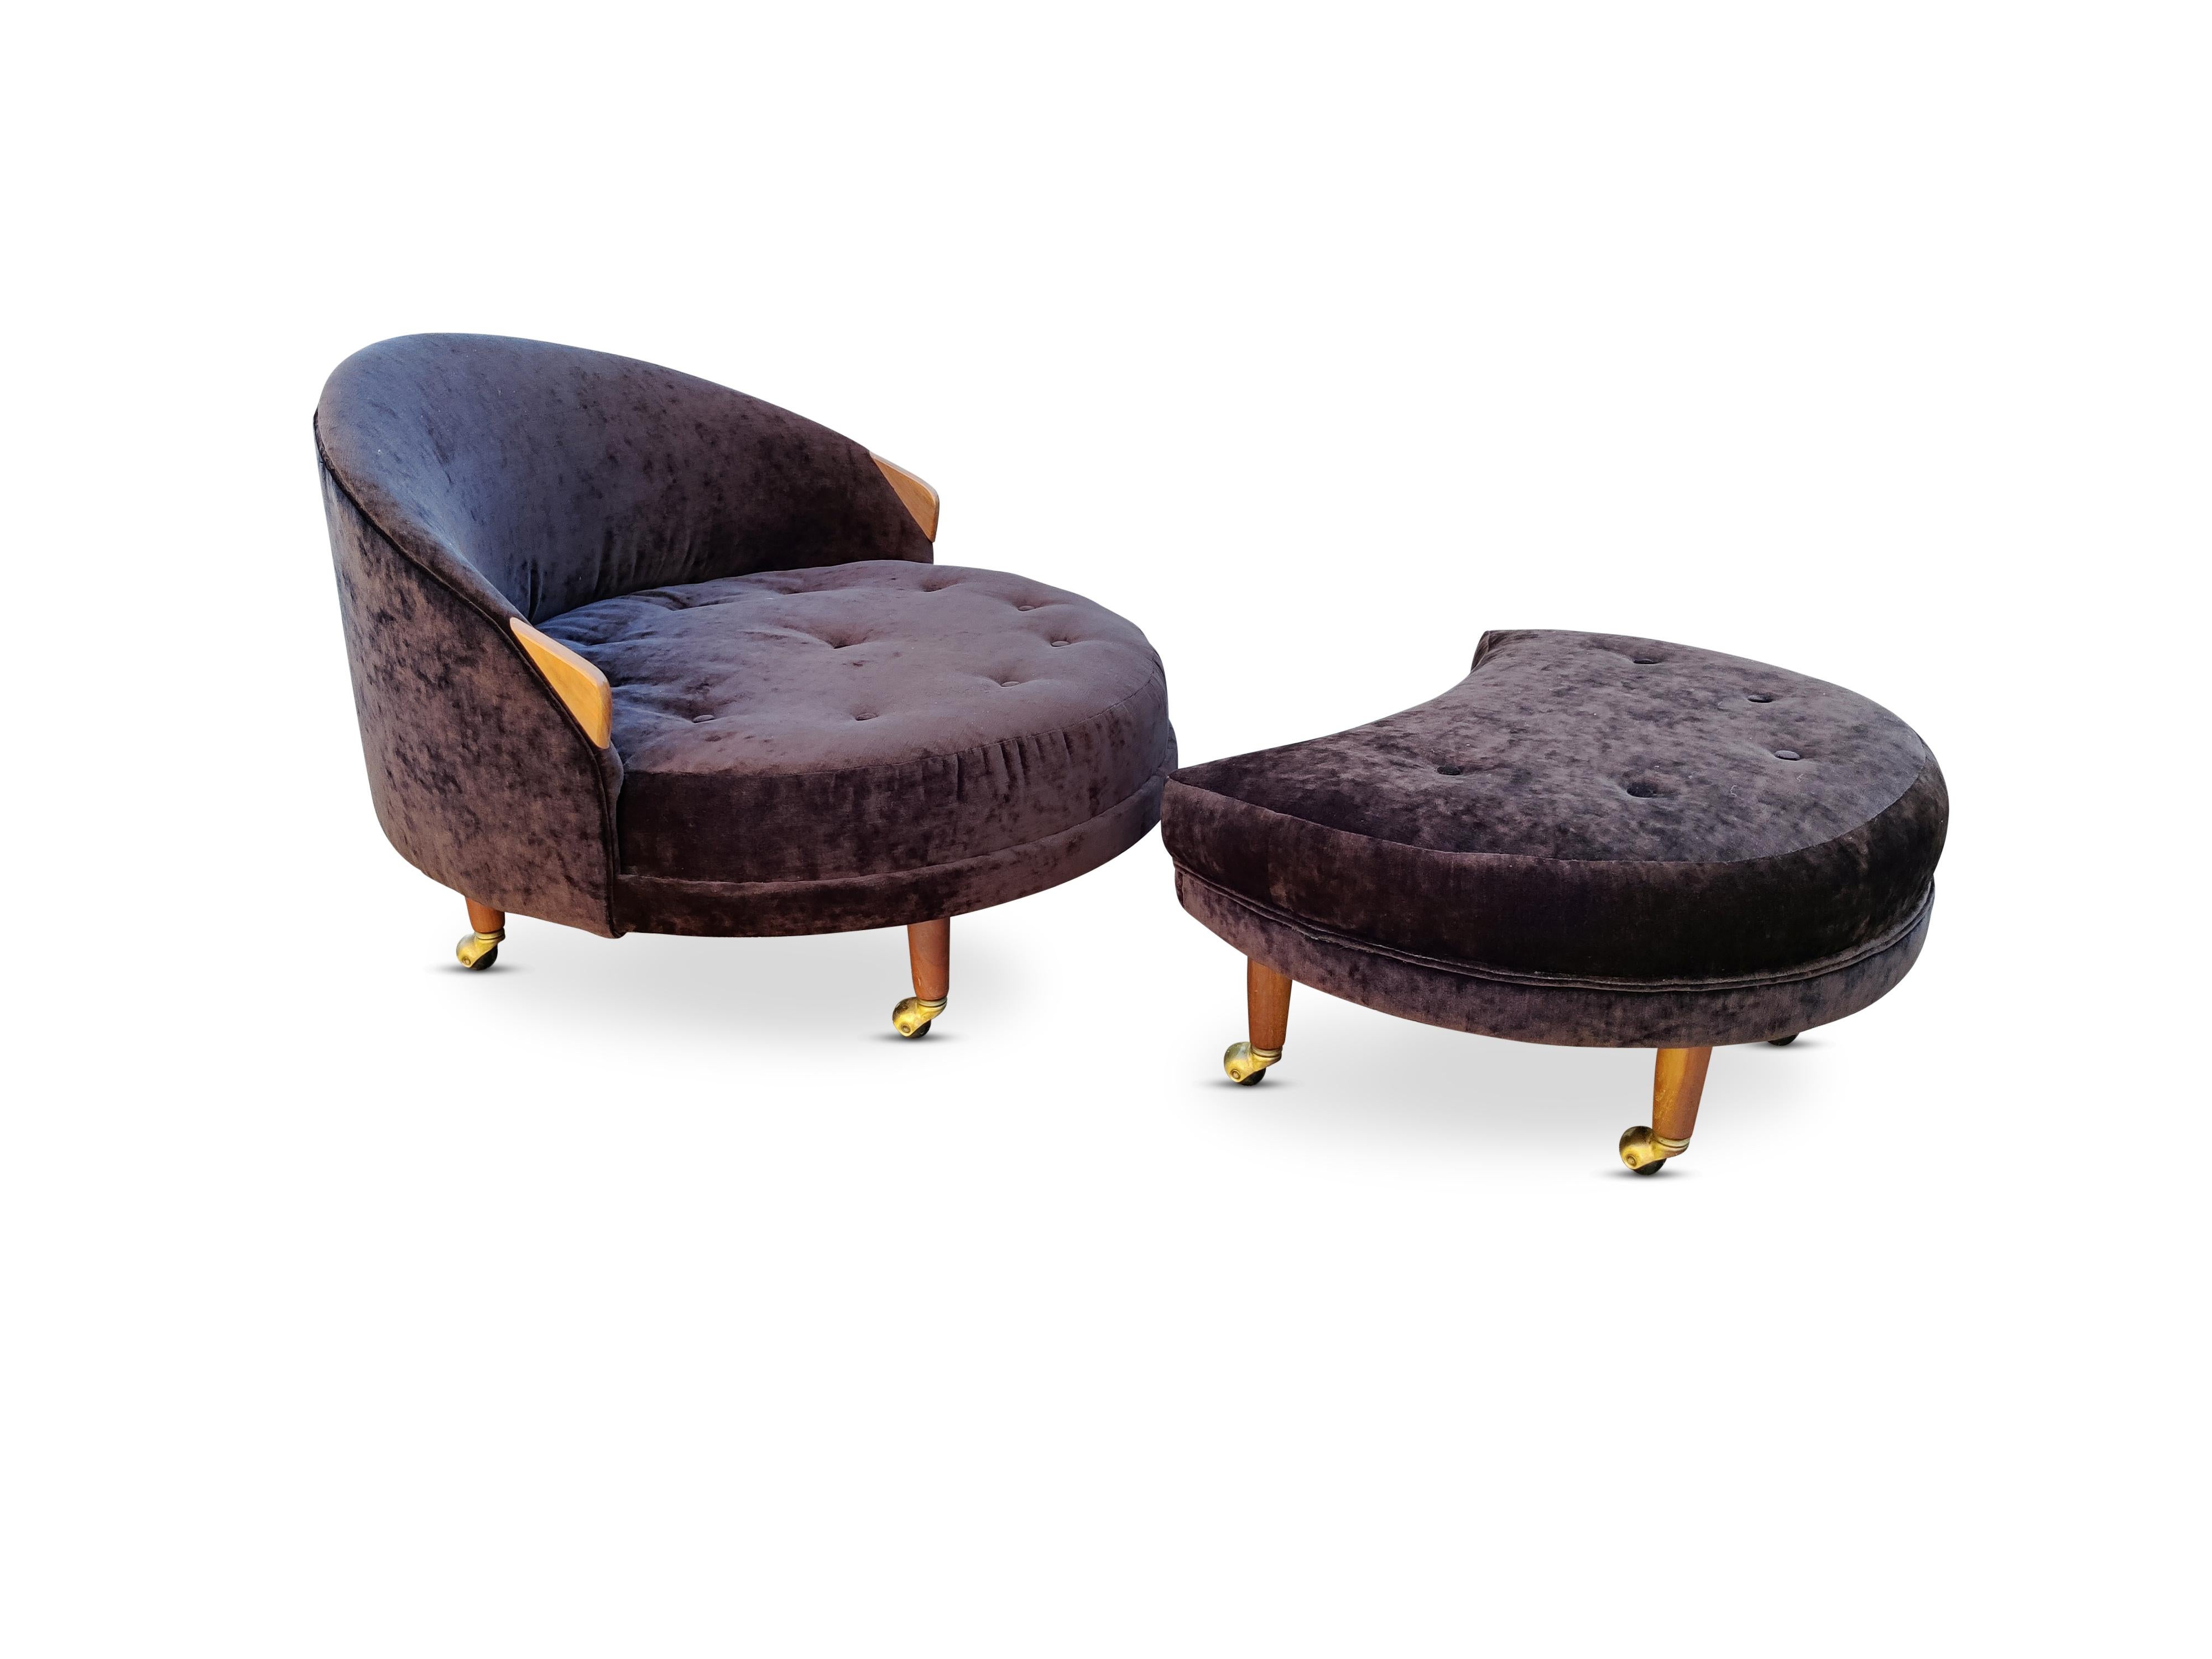 This large sized and spacious 'Havana' chair and ottoman by Adrian Pearsall was designed and produced in the 1960s. This gorgeous example features a recently recovered brown veloure upholstry and walnut arms and legs with brass casters and delicate